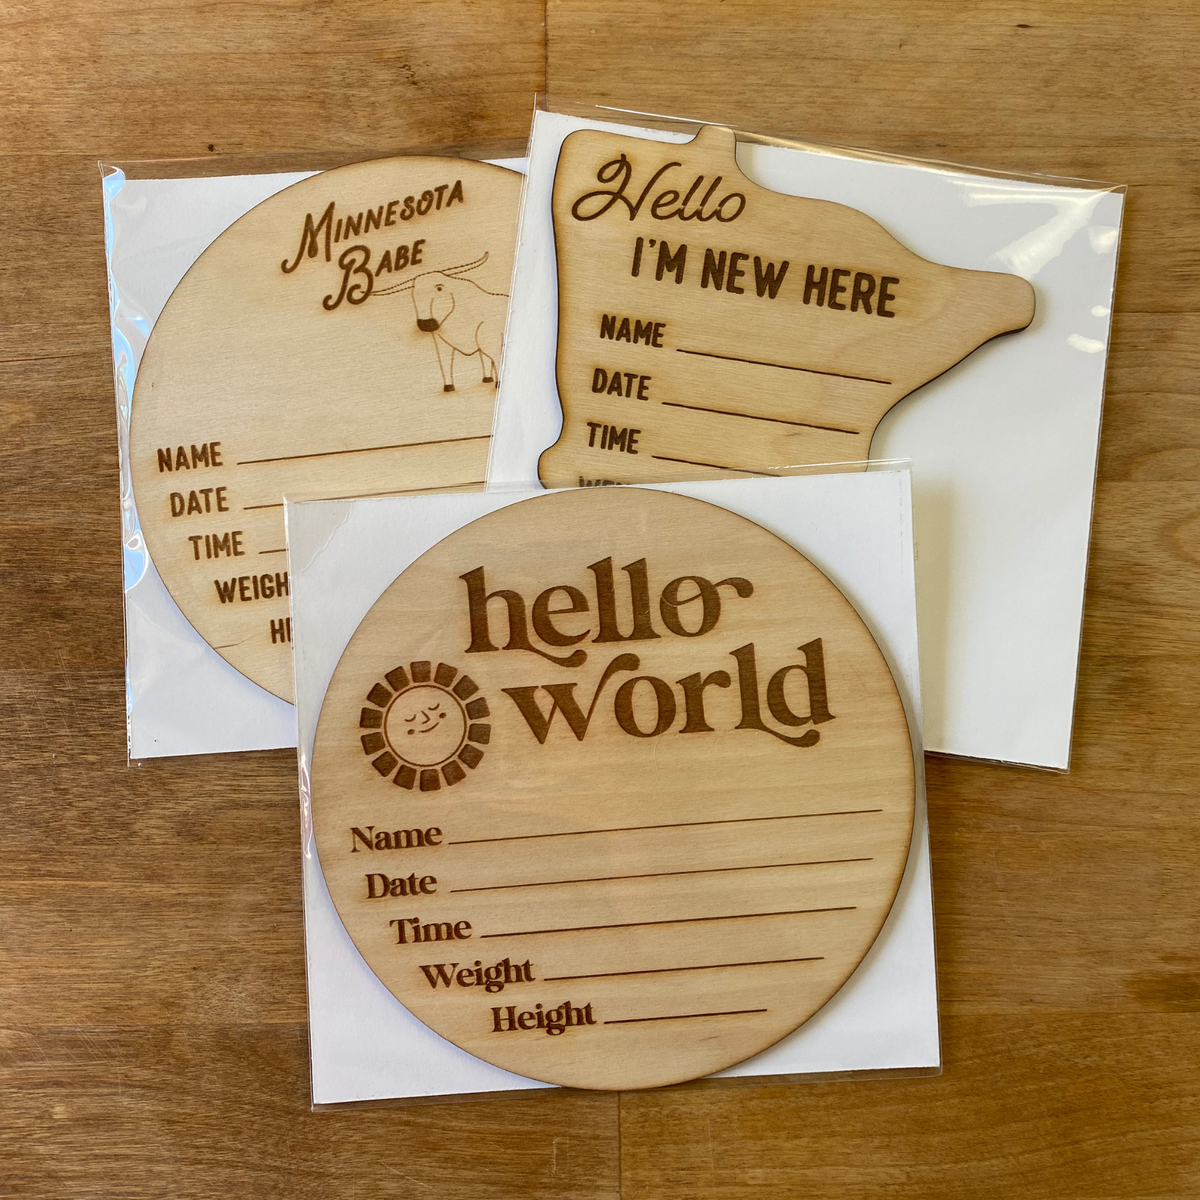 Wood Birth Announcement Sign - I&#39;m Here